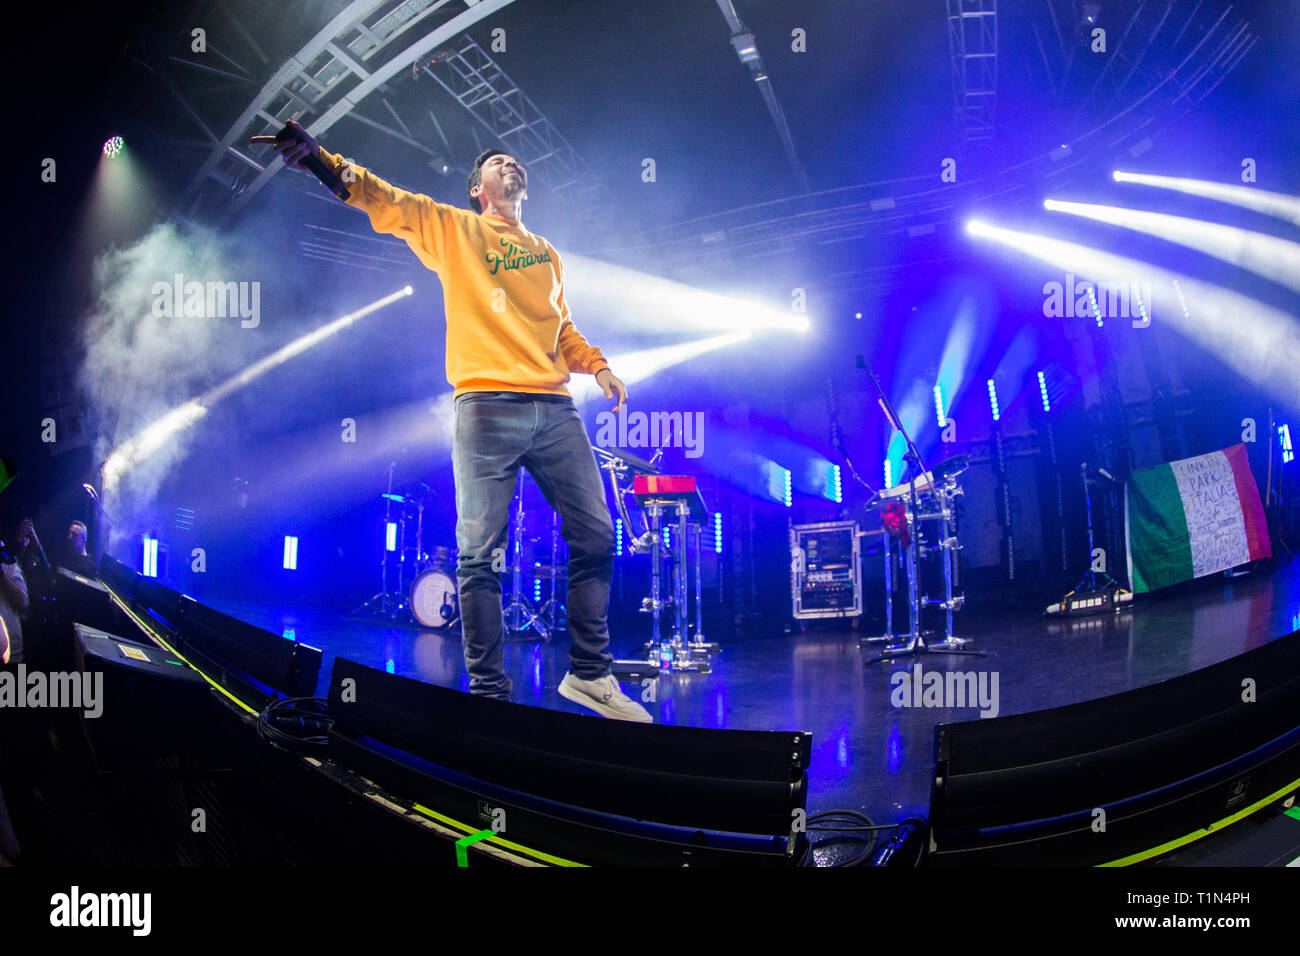 Milan Italy. 14 March 2019. The American musician and rapper MIKE SHINODA performs live on stage at Fabrique during the 'Post Traumatic Tour'. Stock Photo